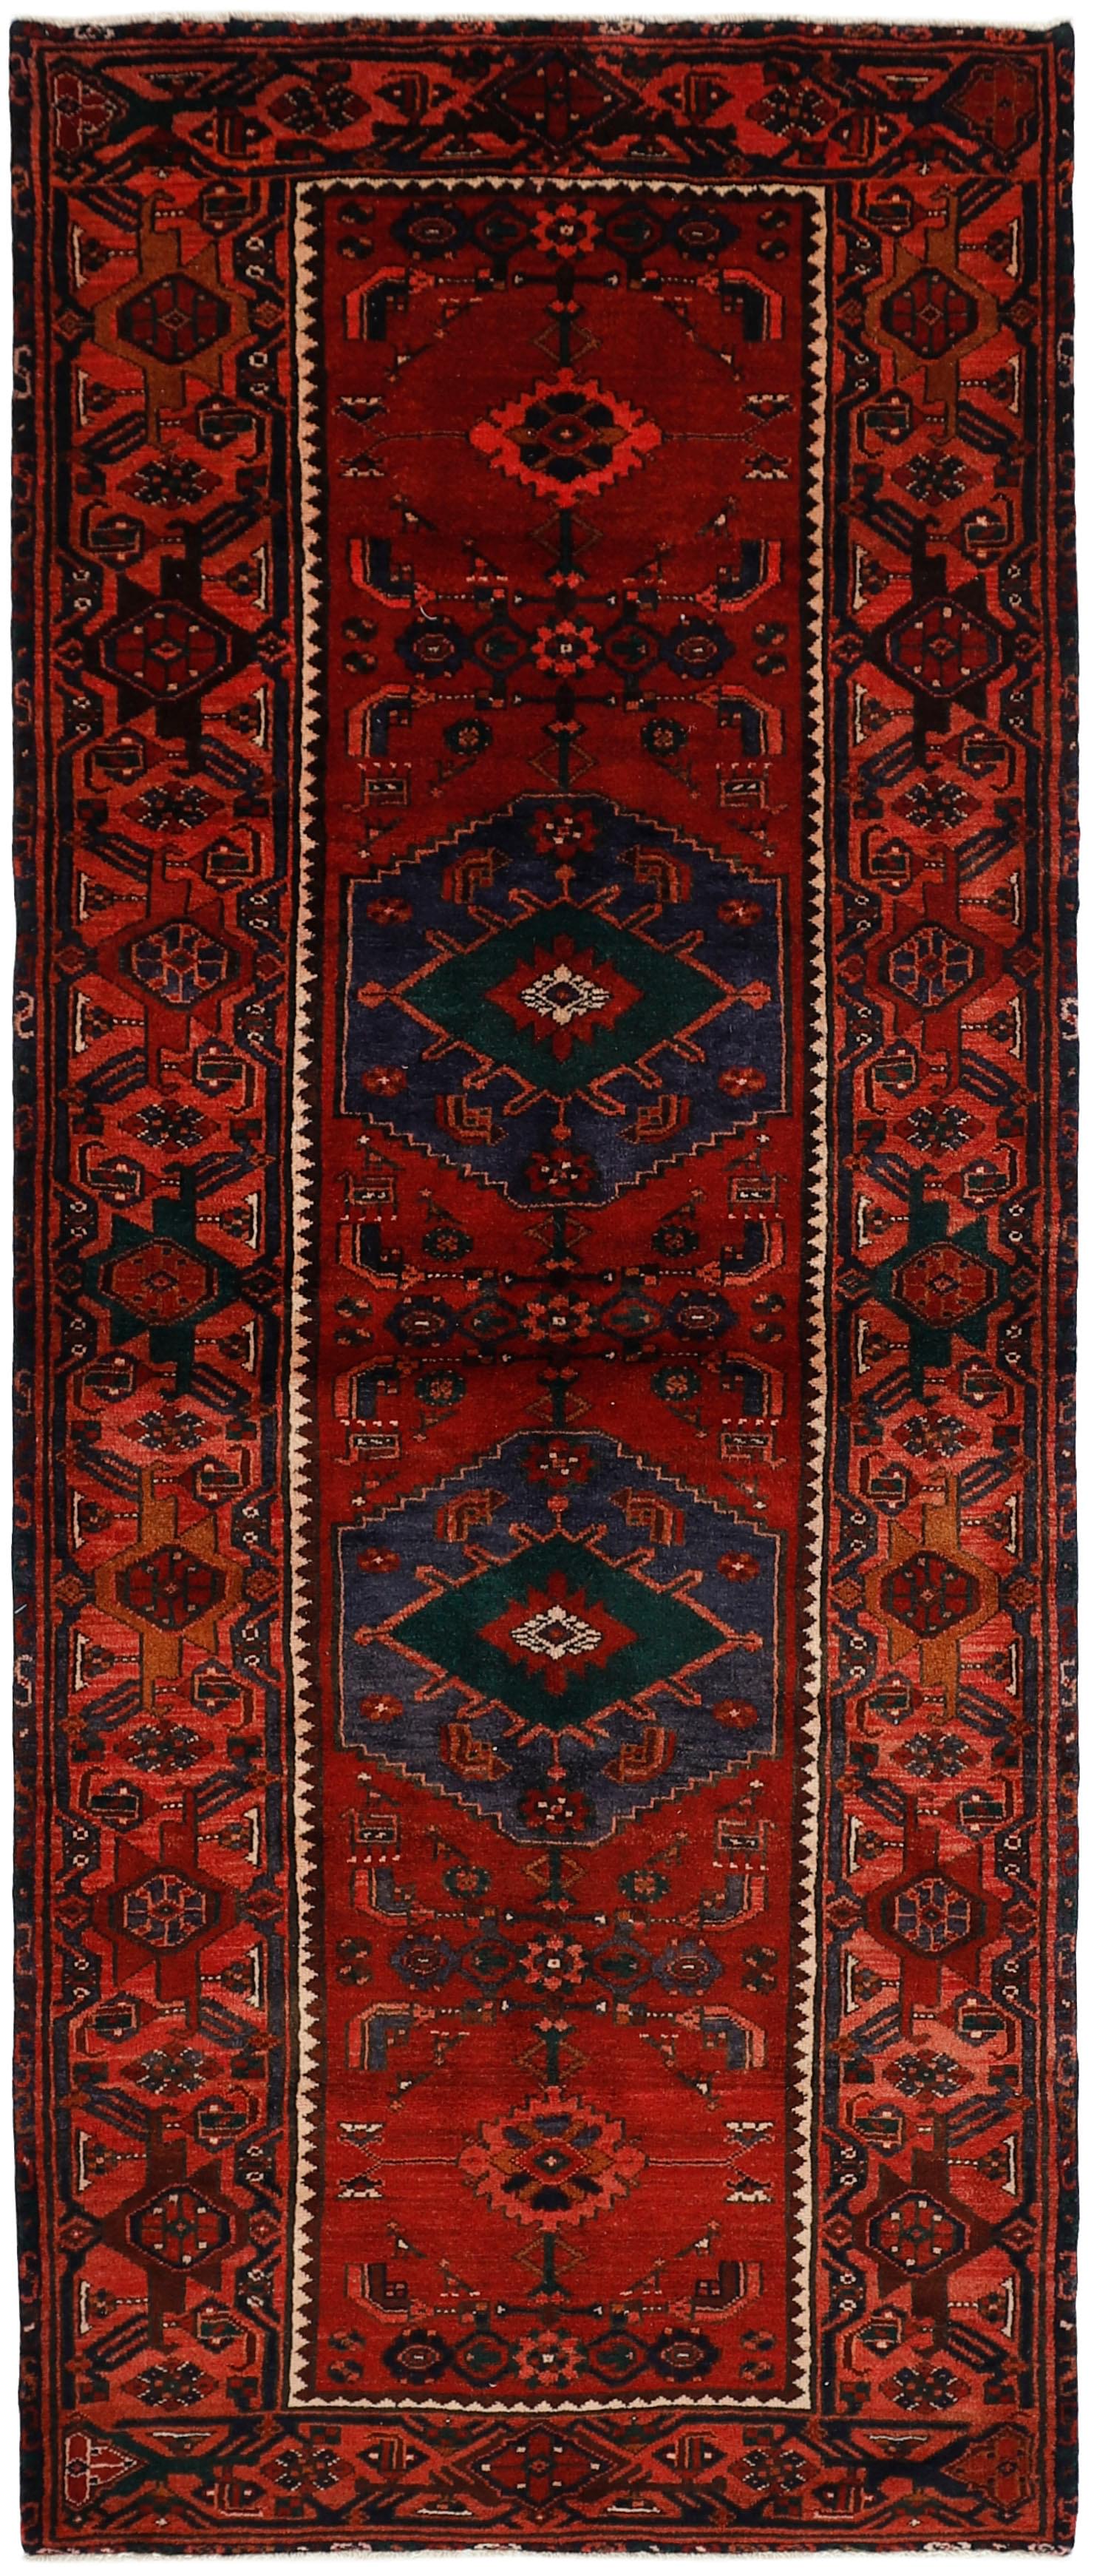 Authentic persian rug with stylised geometric design in red